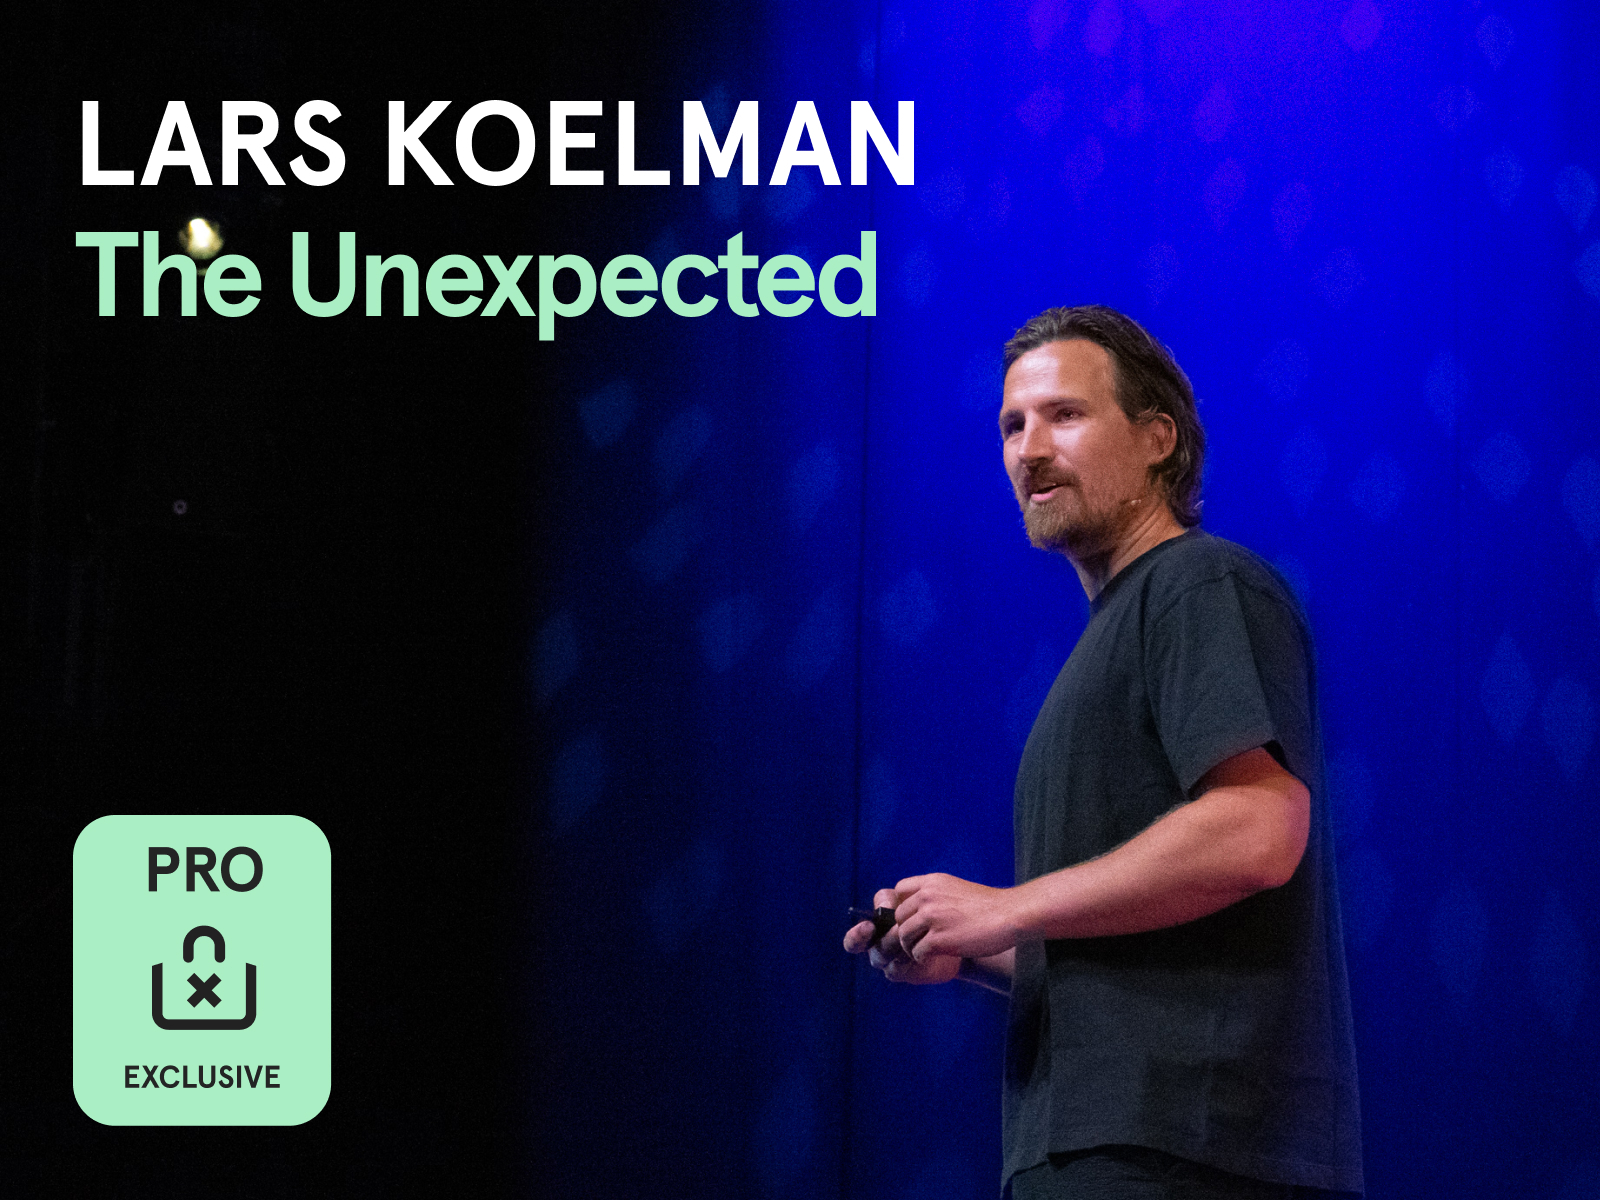 New PRO Content available: watch Lars Koelman's new talk from Awwwards Conference Amsterdam